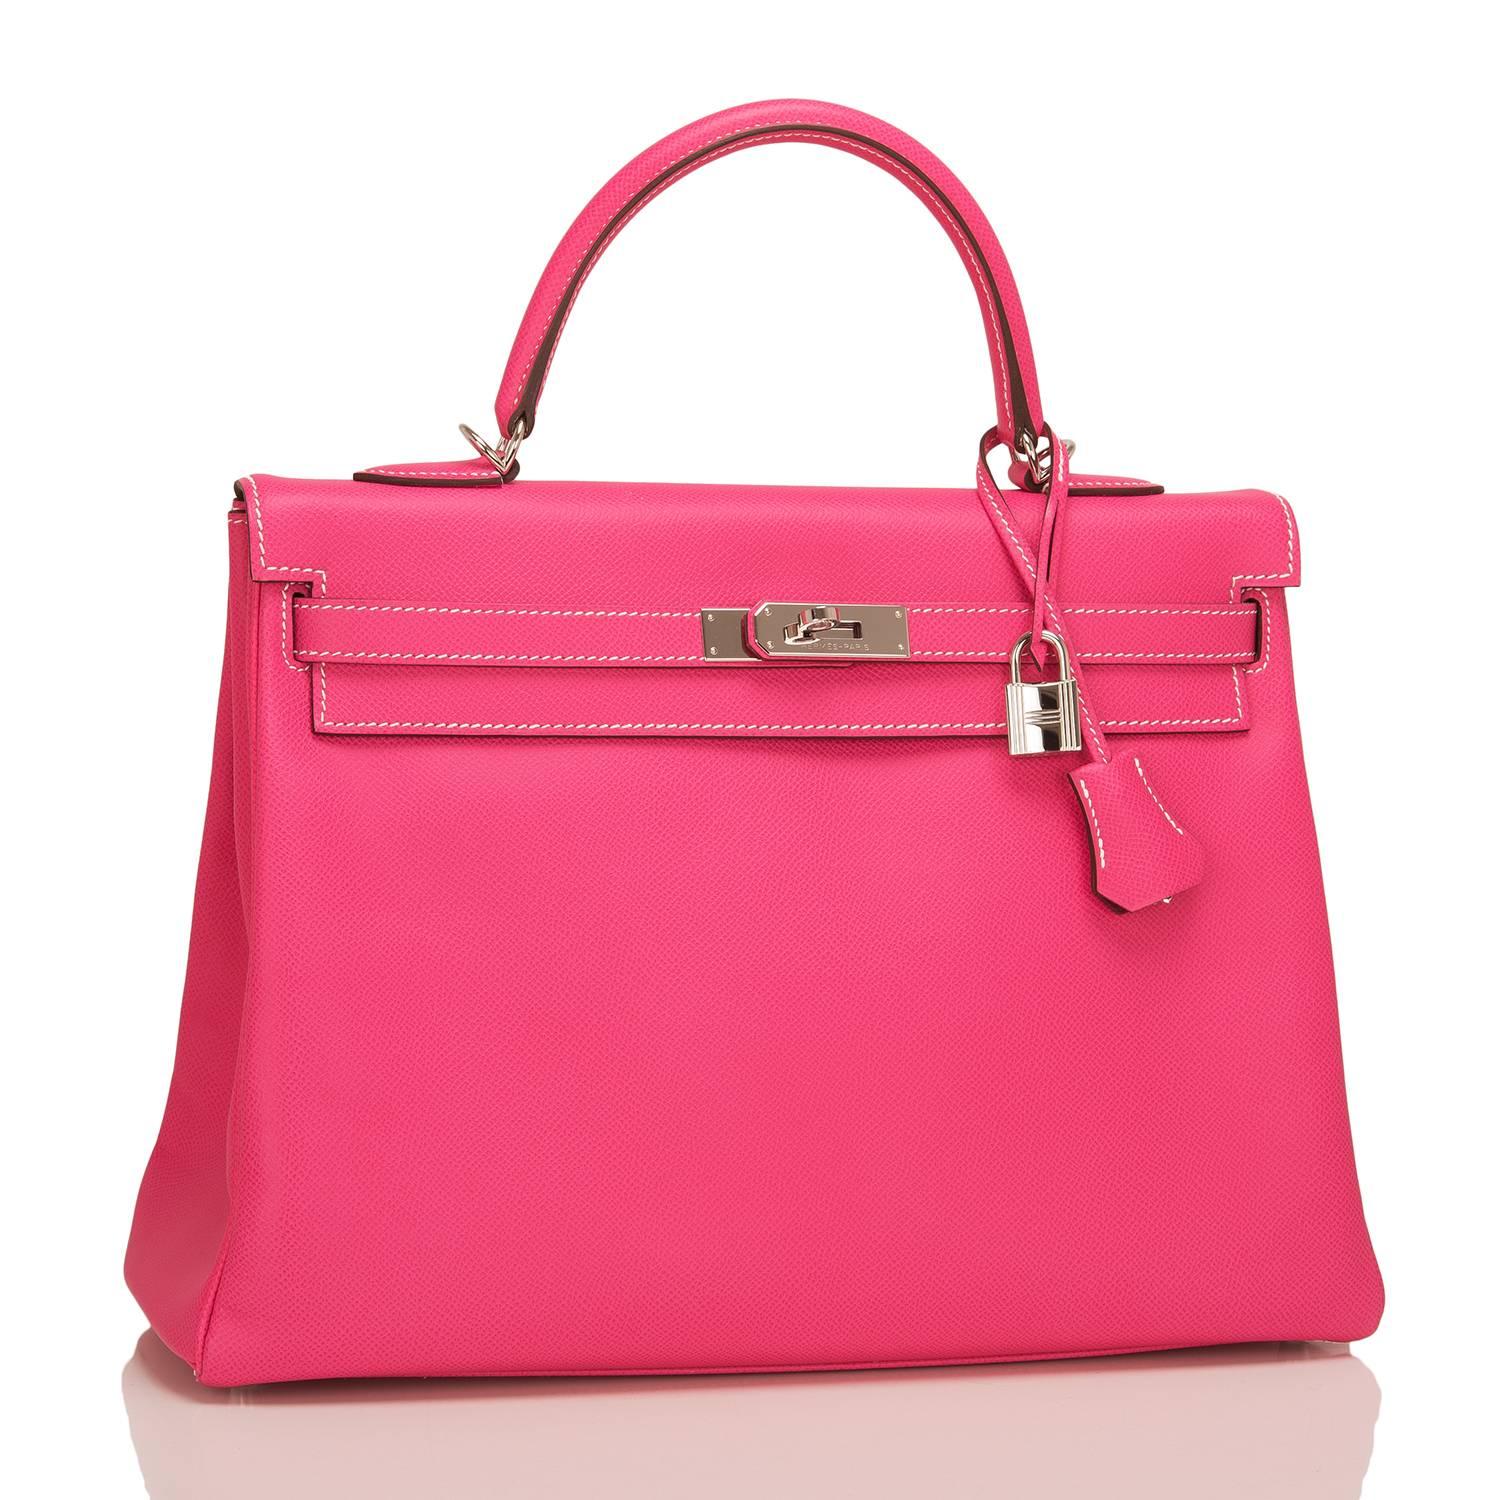 Hermes Bi-Color Rose Tyrien Kelly 35cm from the limited edition 